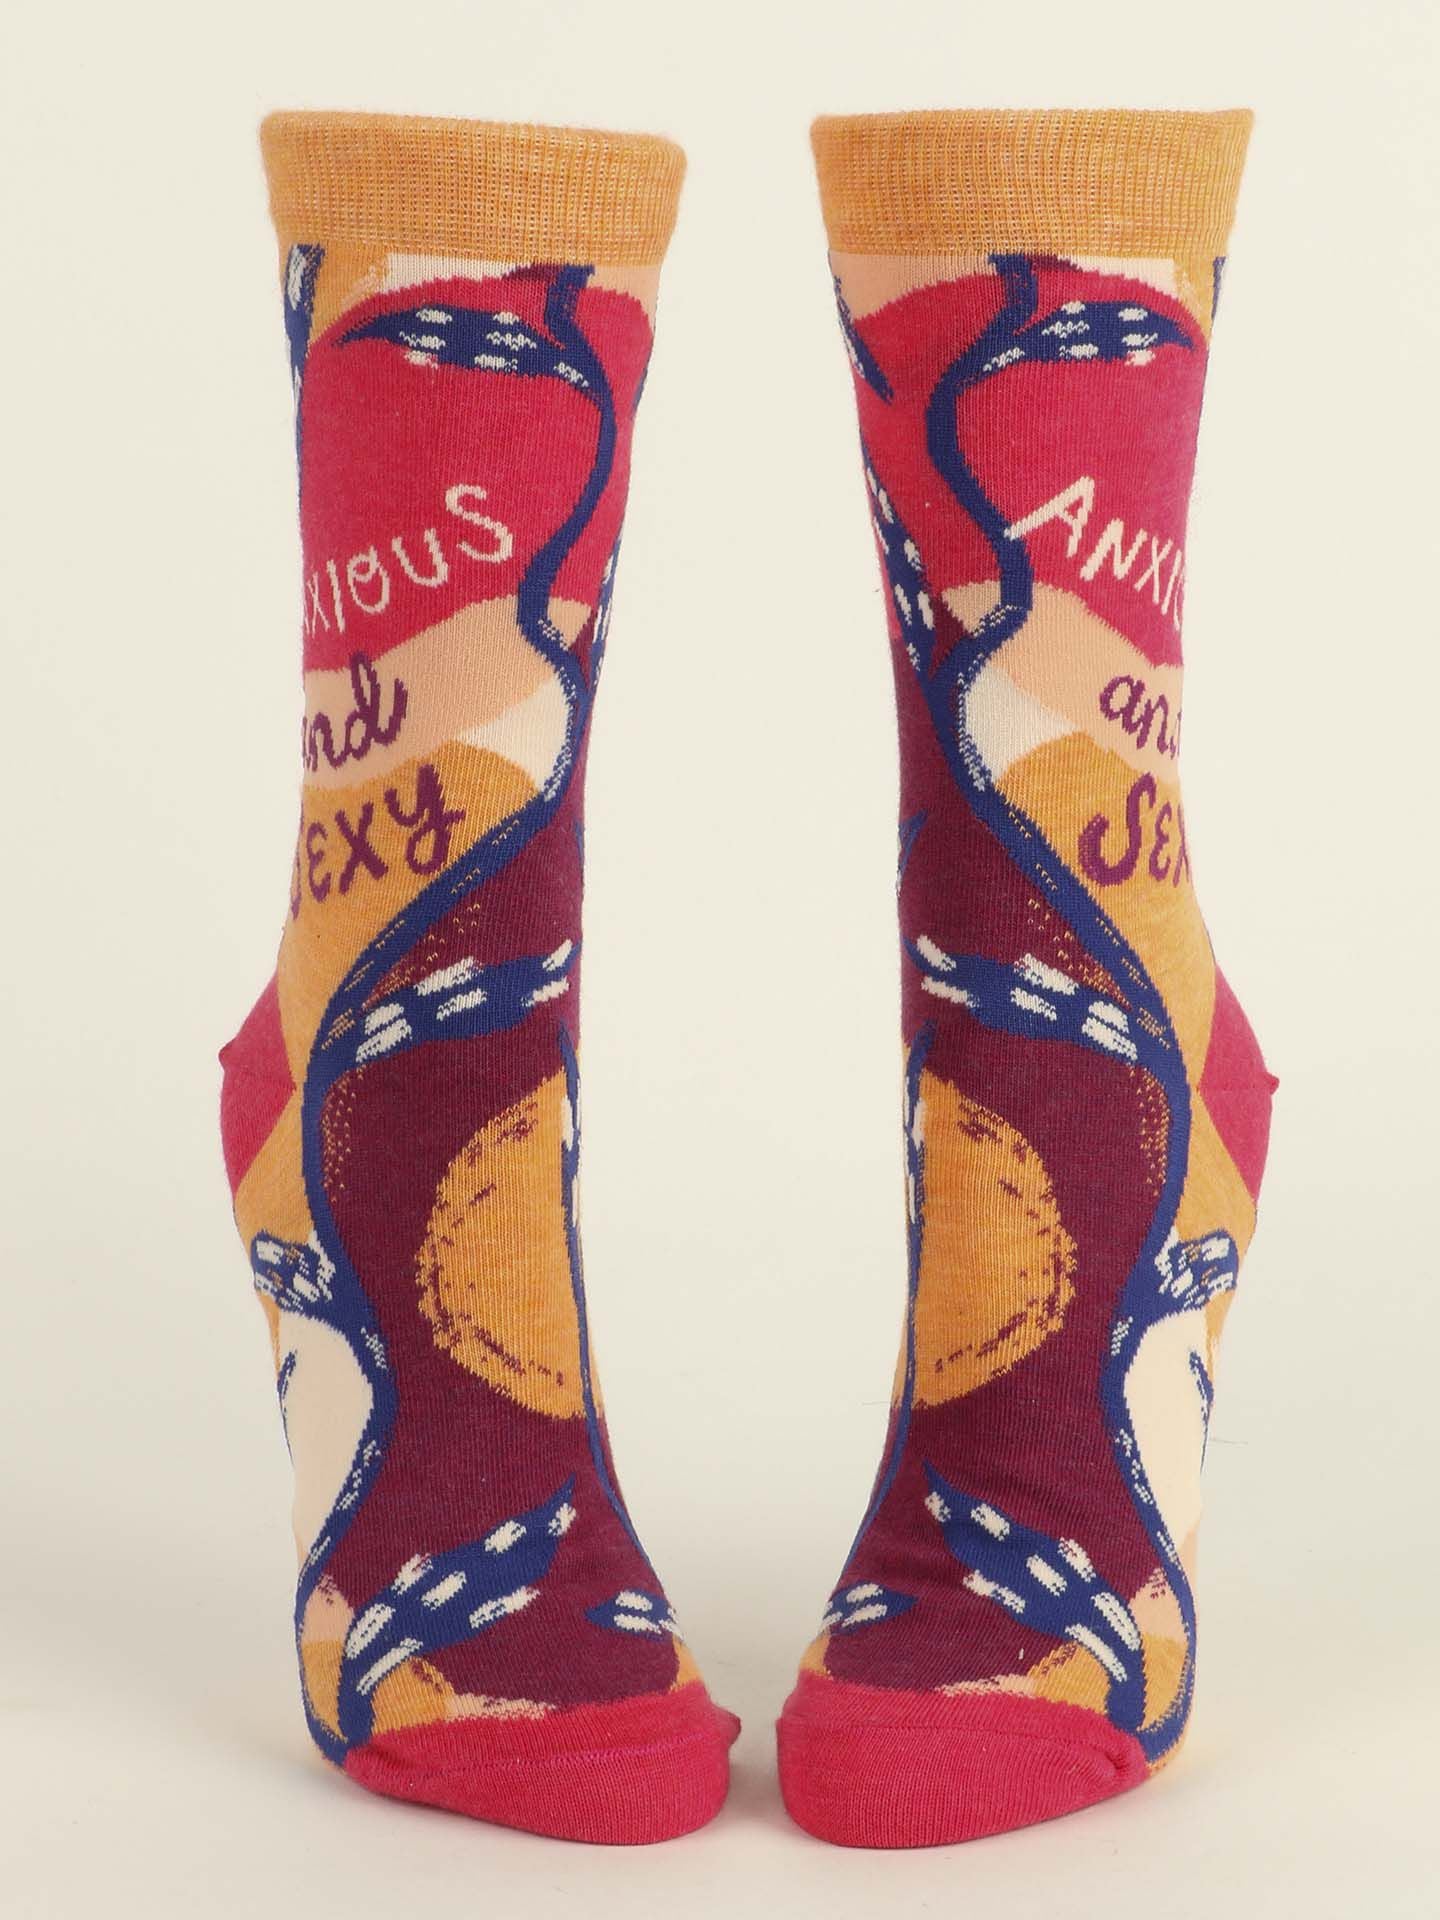 Anxious and Sexy Women's Crew Socks-Apparel > Apparel & Accessories > Clothing > Underwear & Socks-Quinn's Mercantile